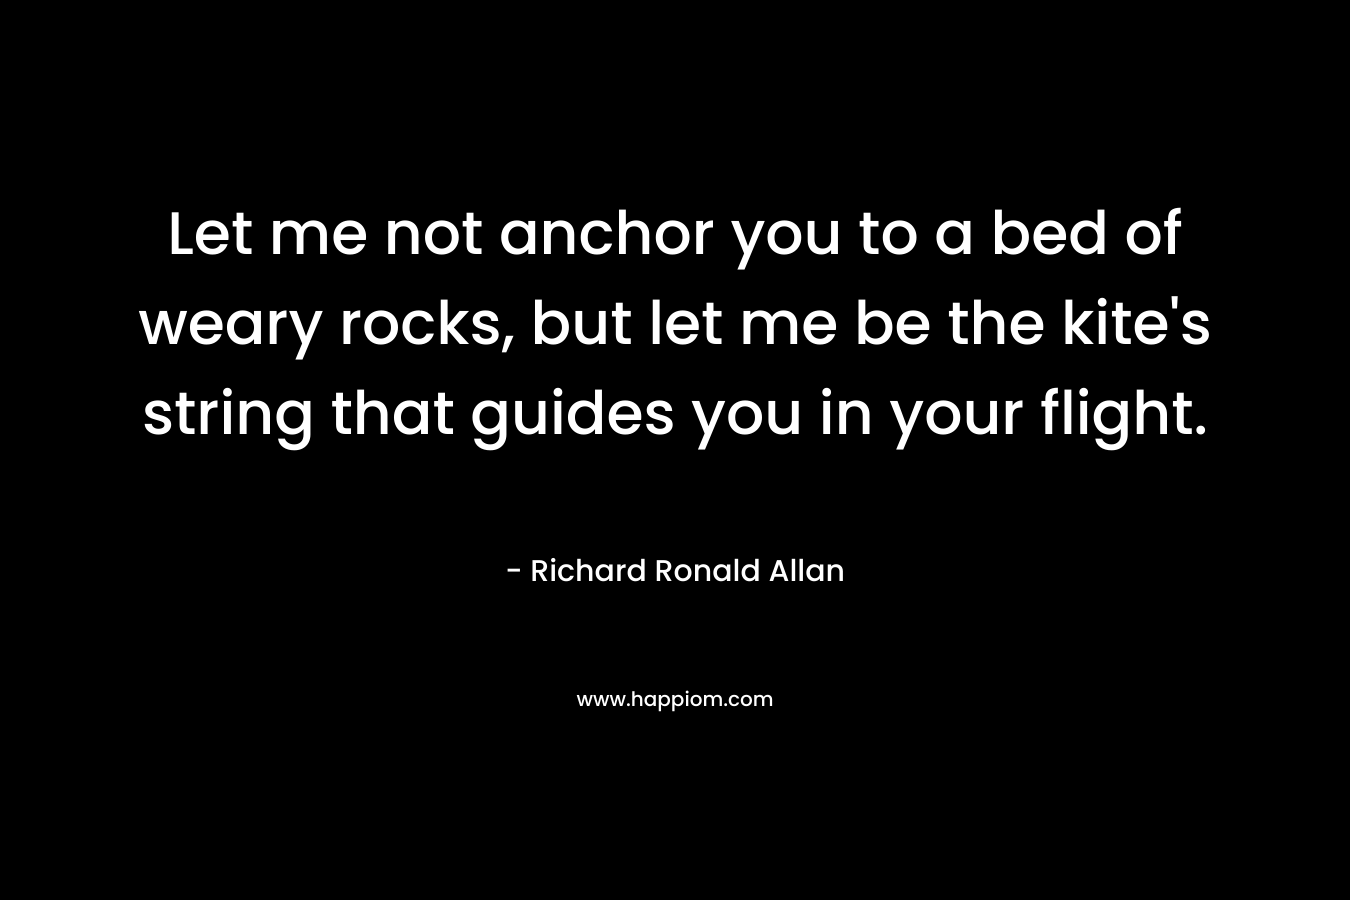 Let me not anchor you to a bed of weary rocks, but let me be the kite’s string that guides you in your flight. – Richard Ronald Allan